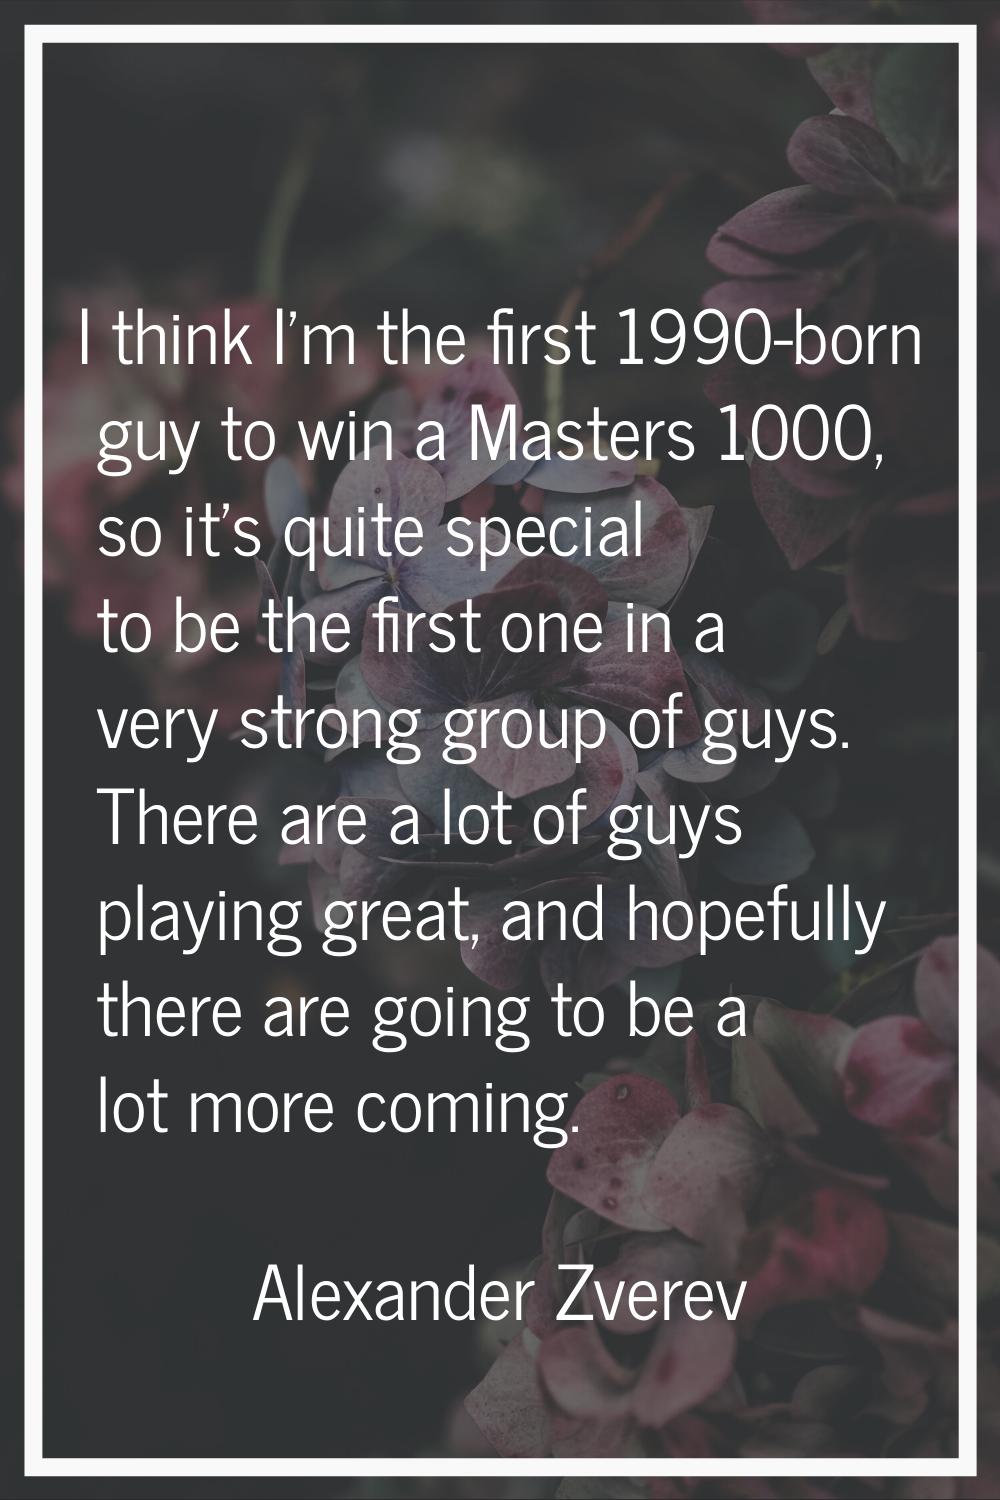 I think I'm the first 1990-born guy to win a Masters 1000, so it's quite special to be the first on